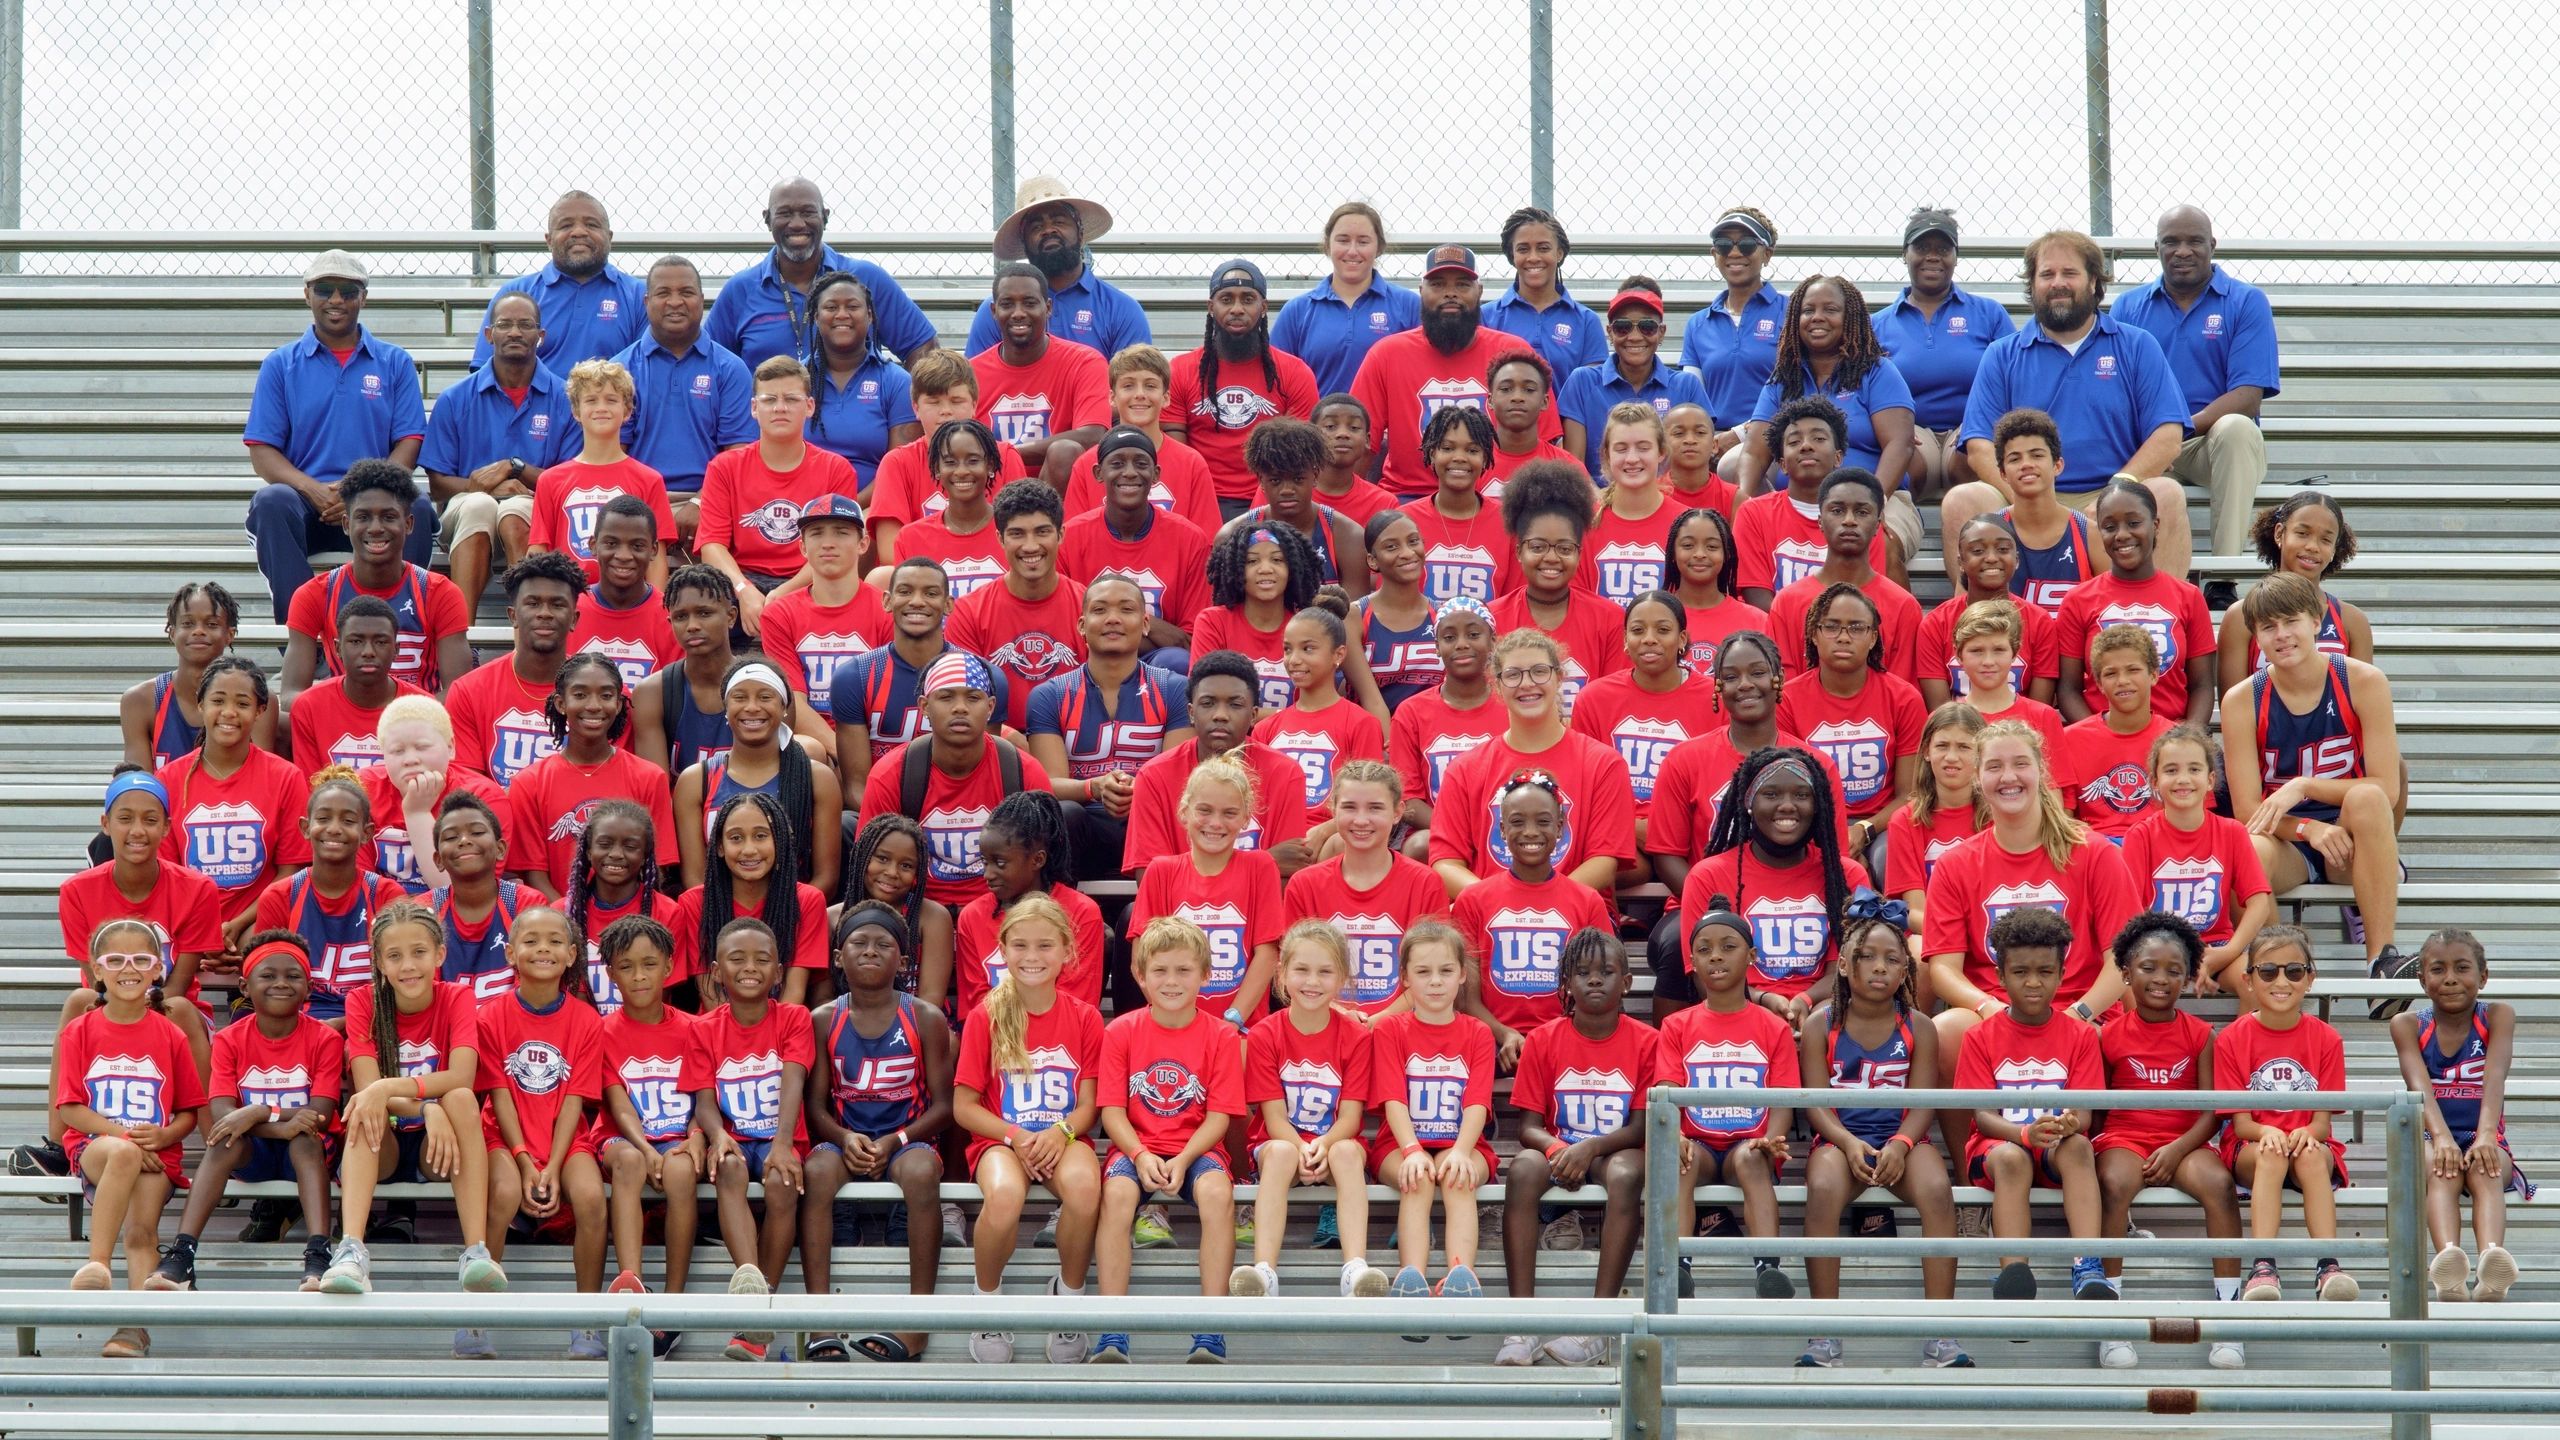 Standout Students: Track team near Baton Rouge qualifies for Junior Olympics